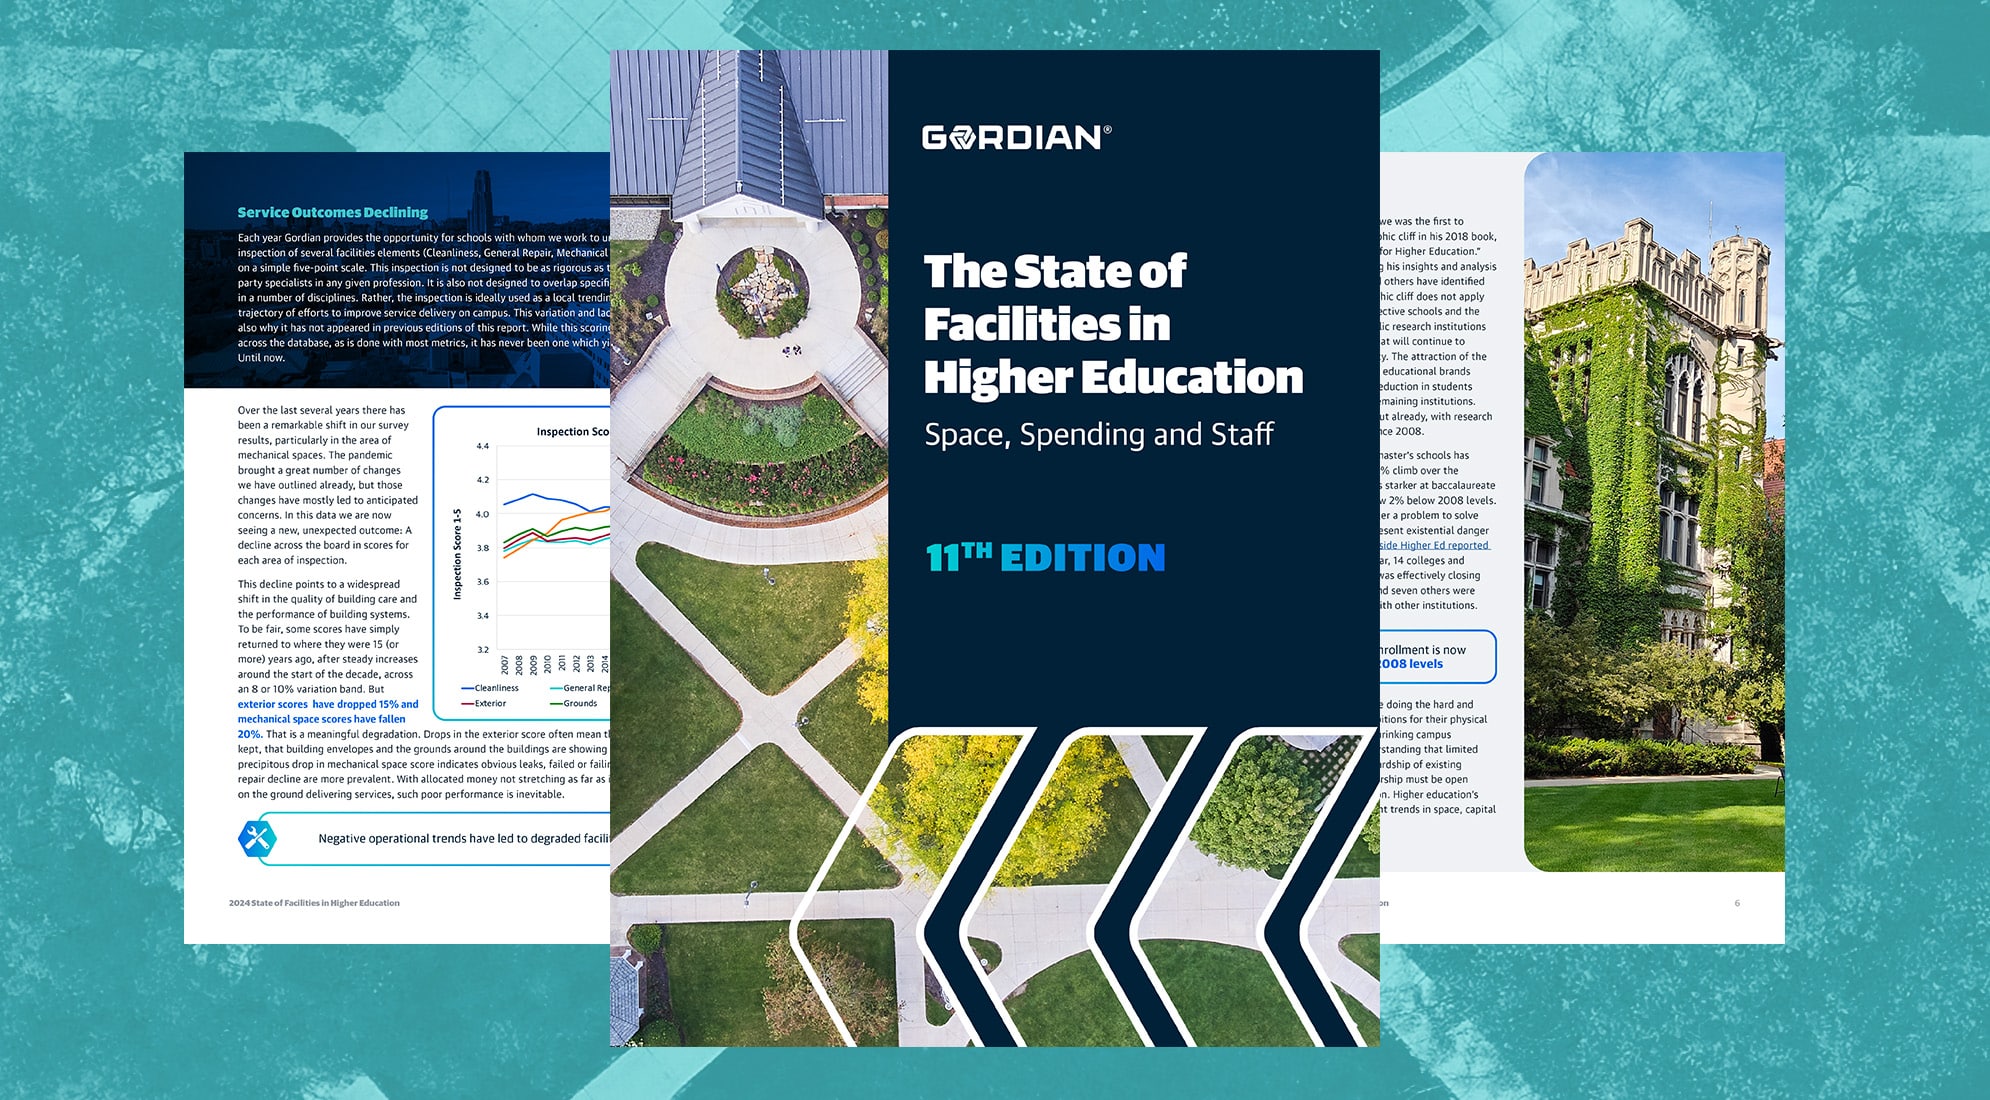 The State of Facilities in Higher Education, 11th Edition